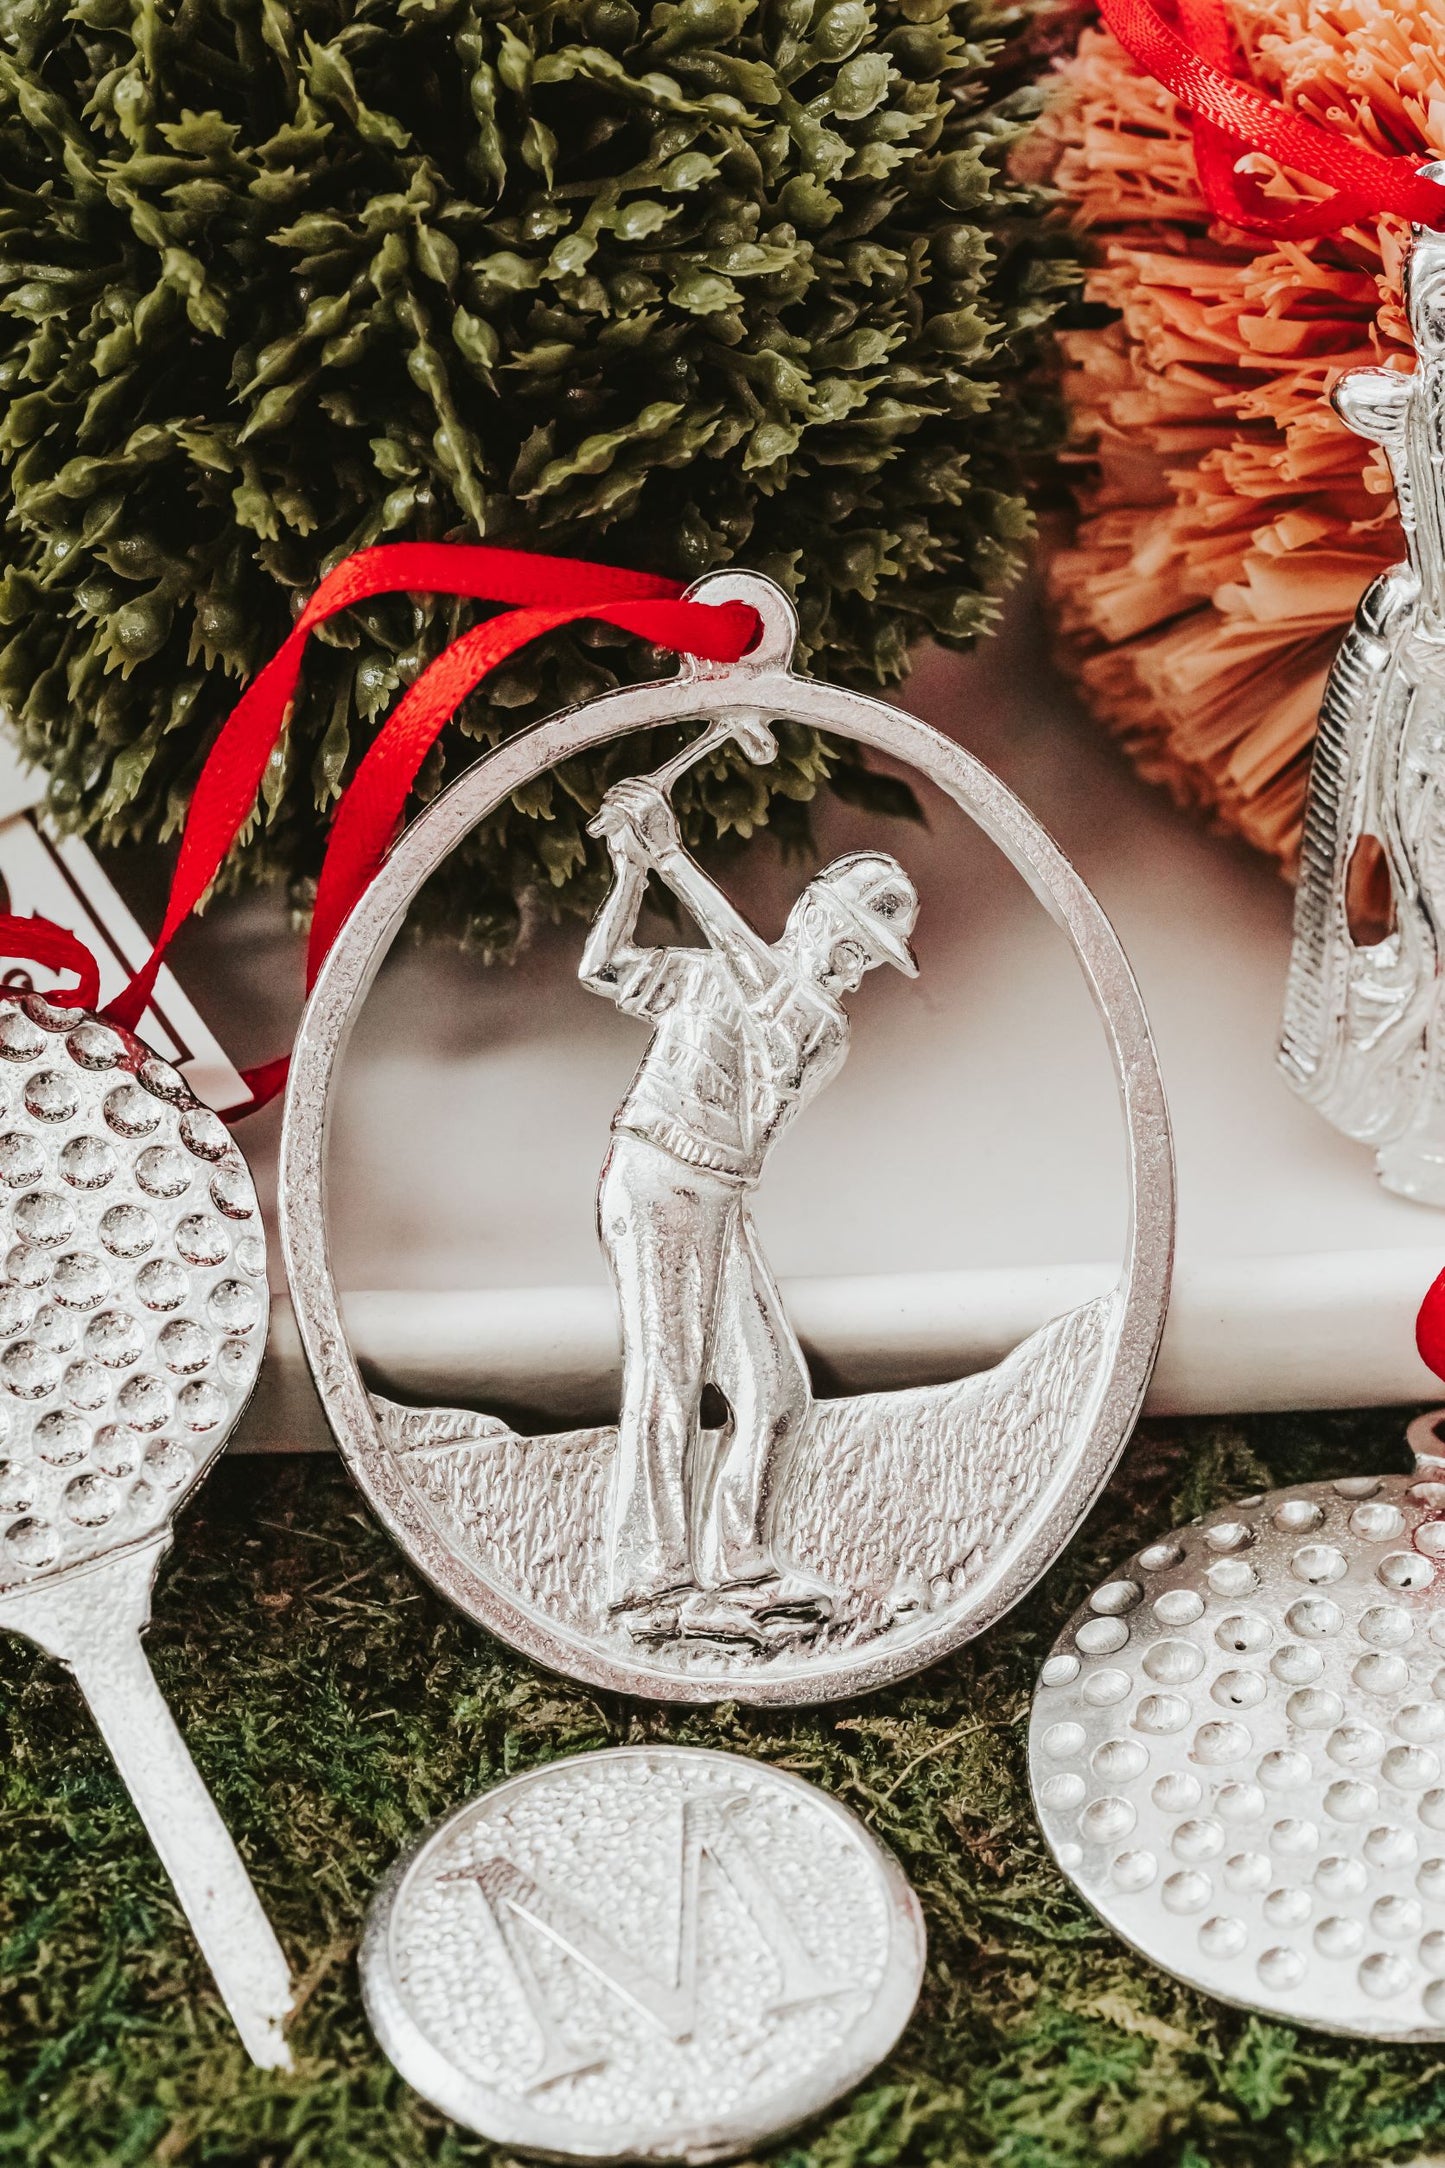 Silver Pewter Metal Golf Ornament Gift Set Top Gift Ideas - House of Morgan Pewter